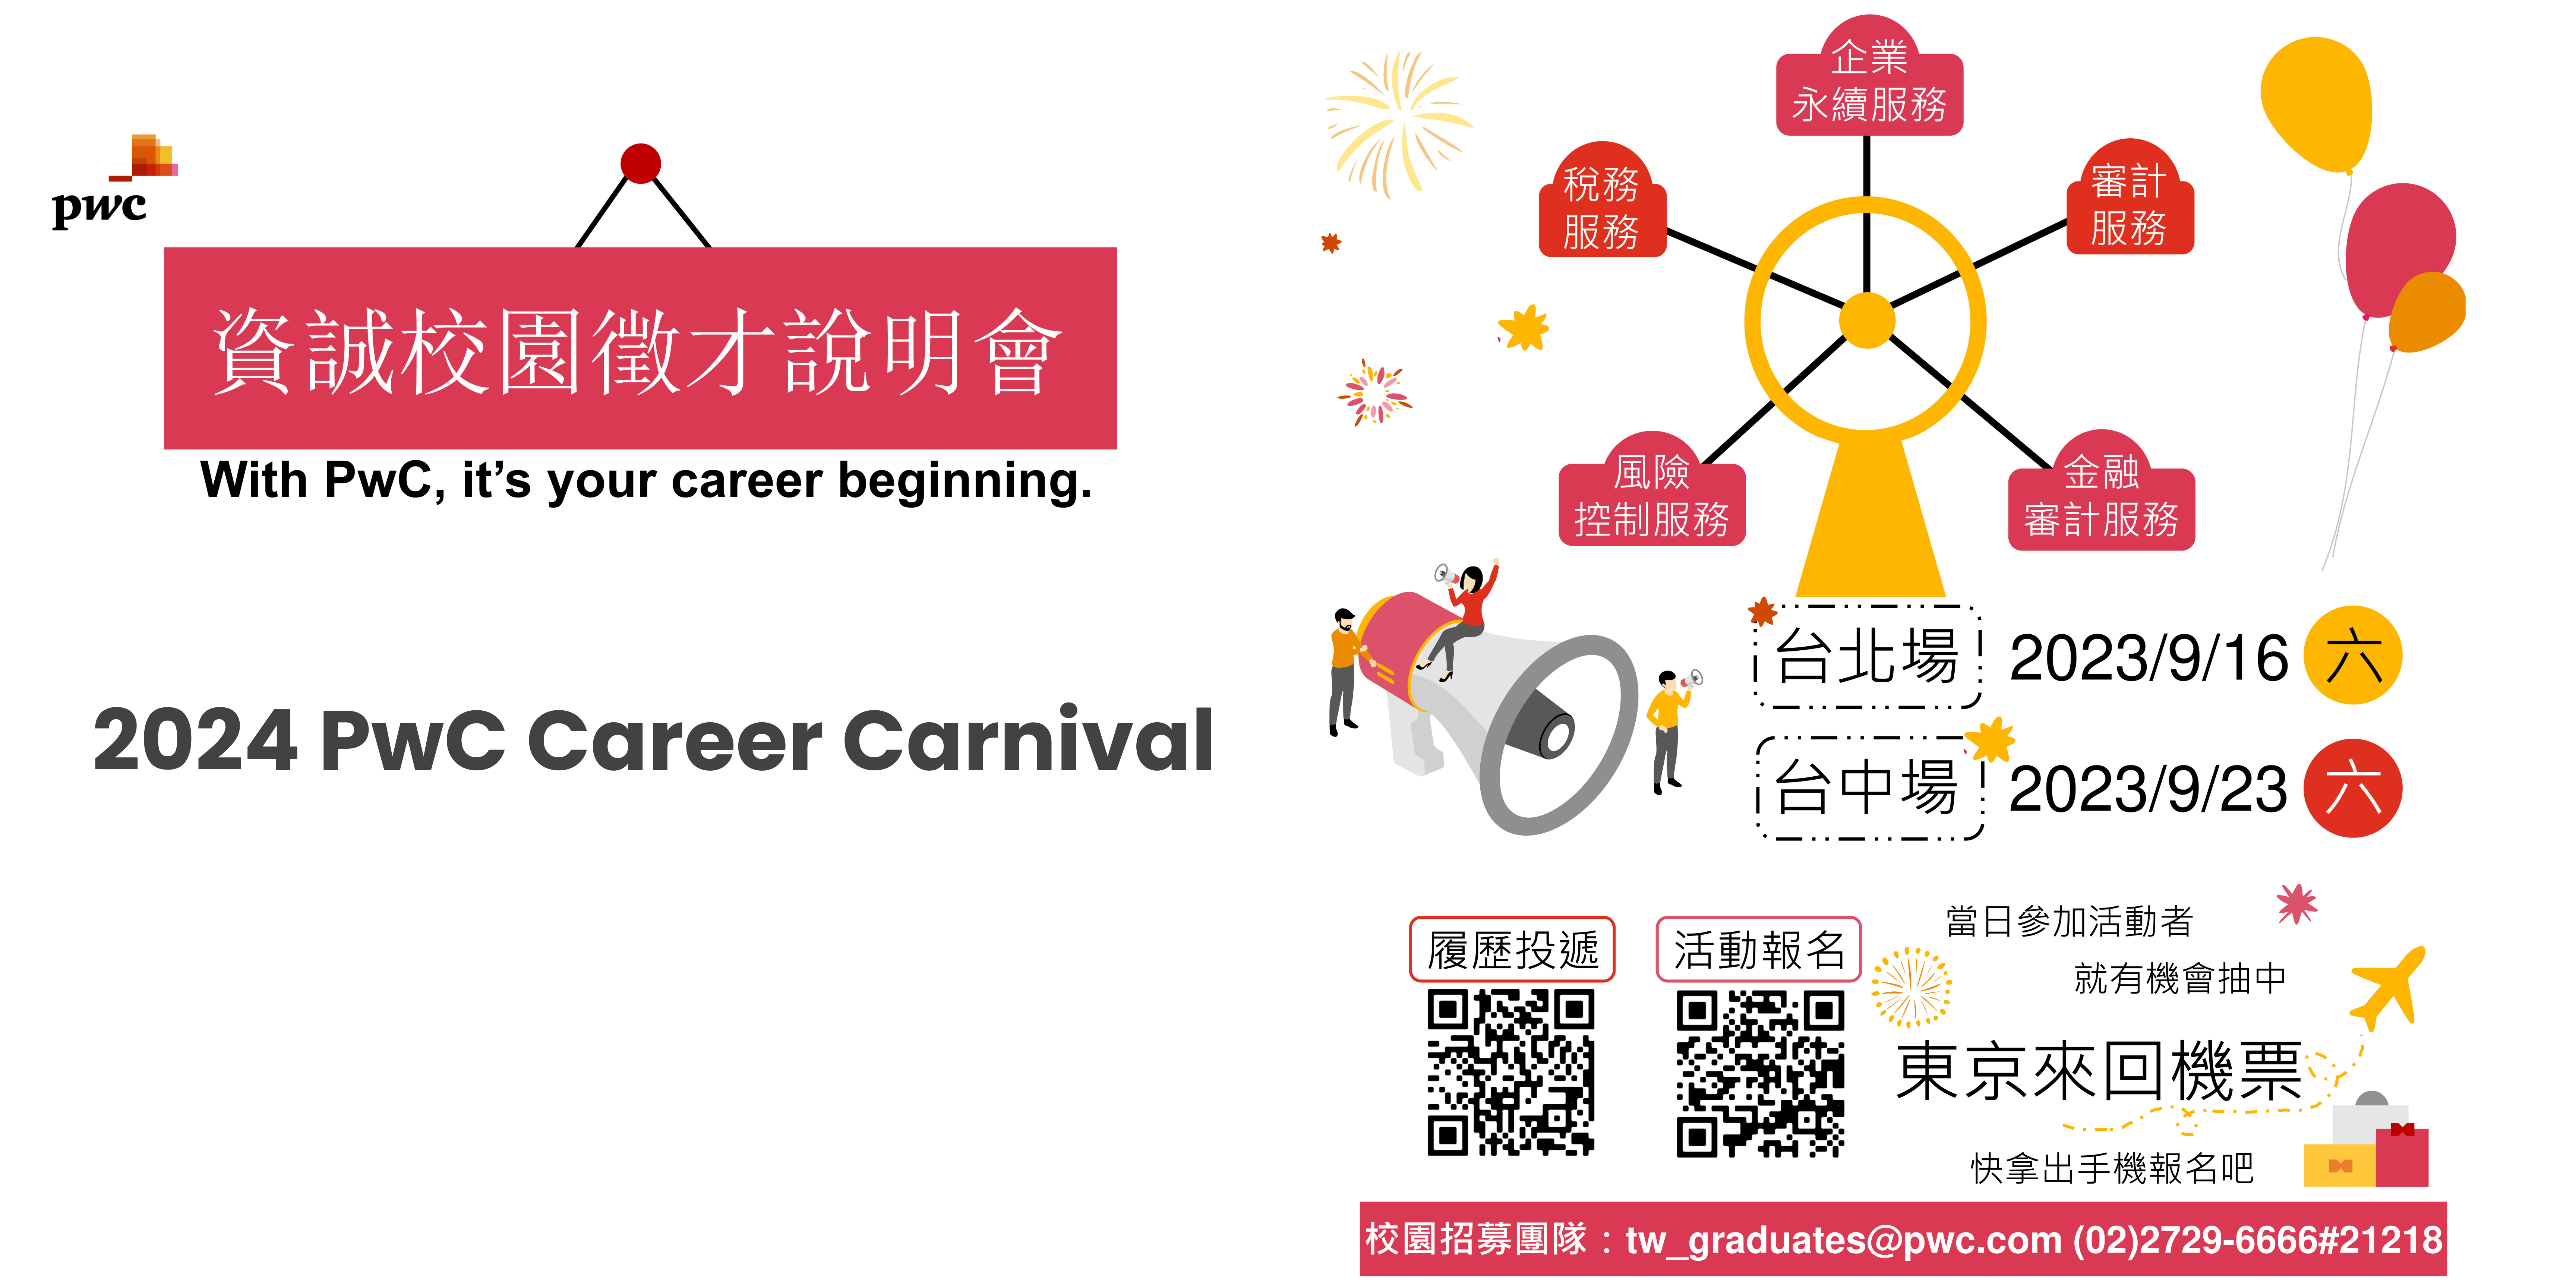 Featured image for “Sign up for 2024 PwC Career Carnival and Get the Round-Trip Ticket to Tokyo”